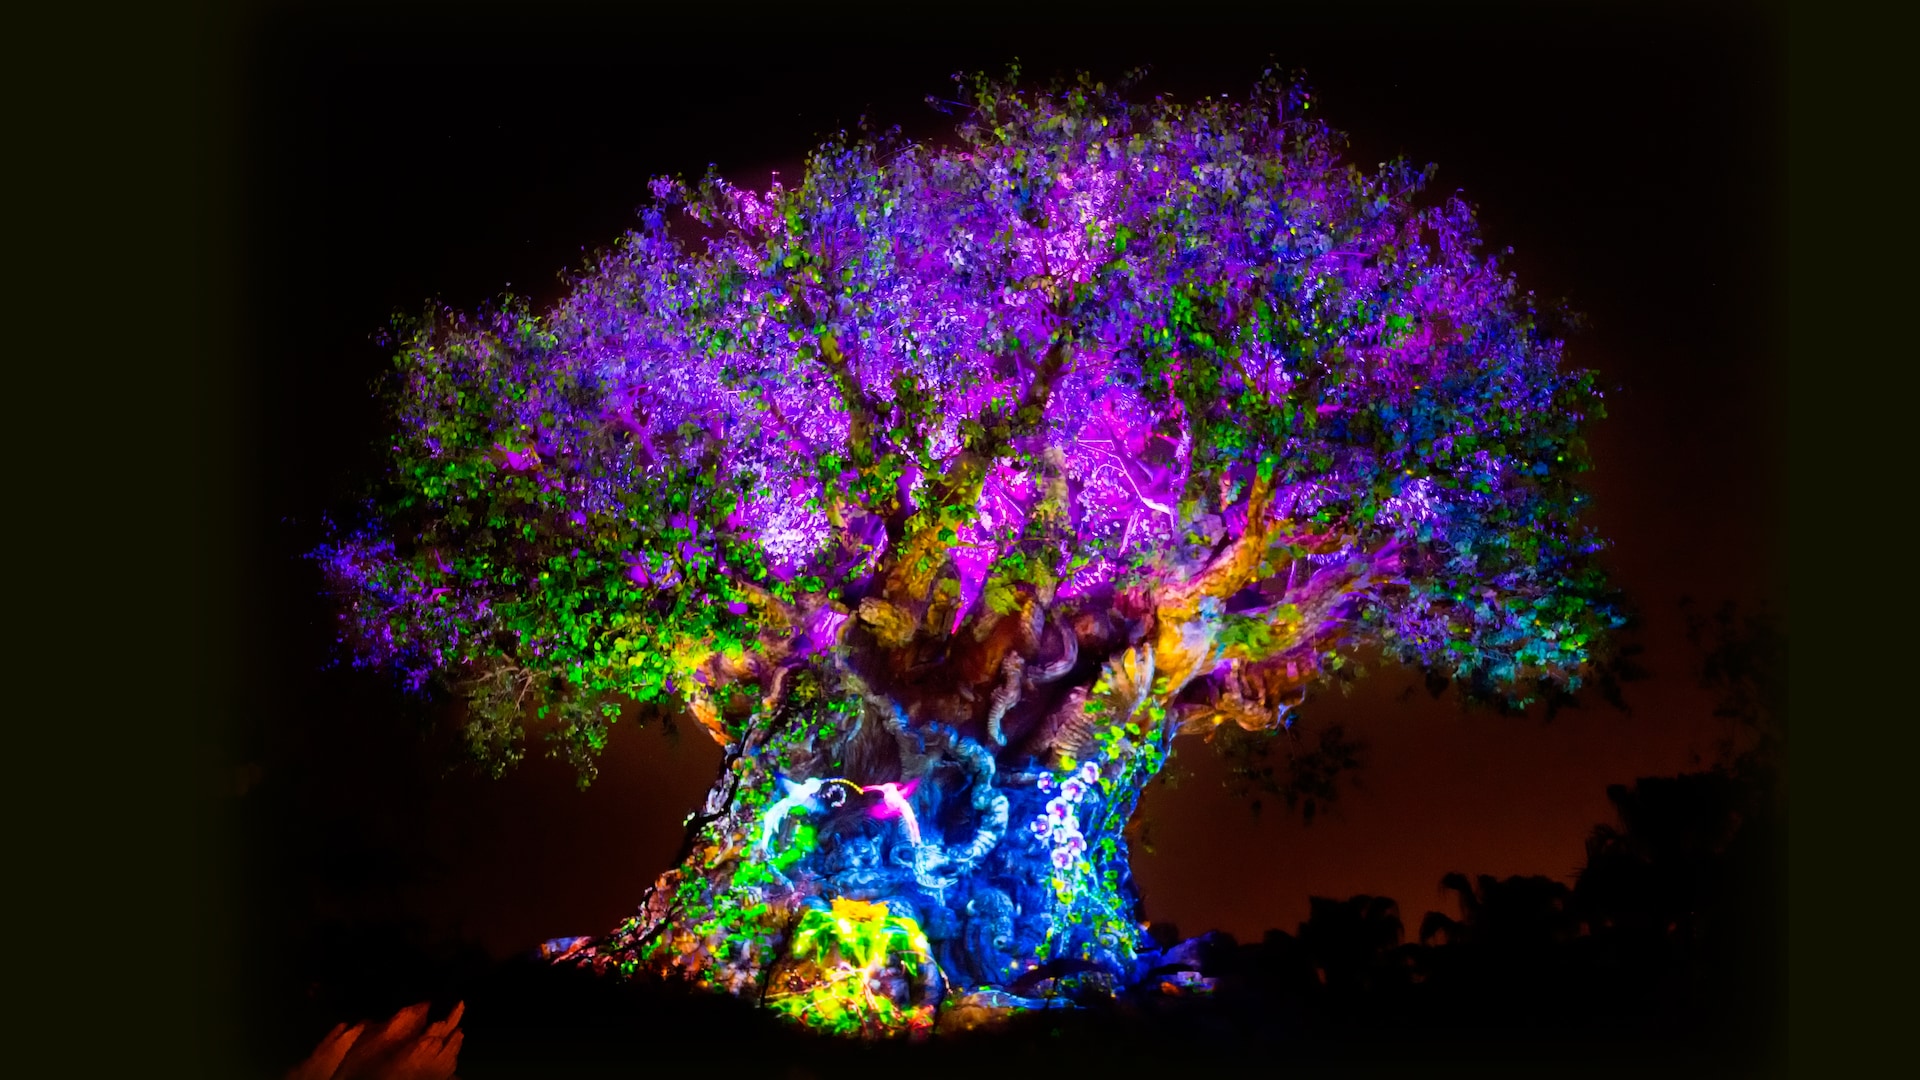 The Tree of Life awakens at nighttime with vibrant lights, animal projections and special effects